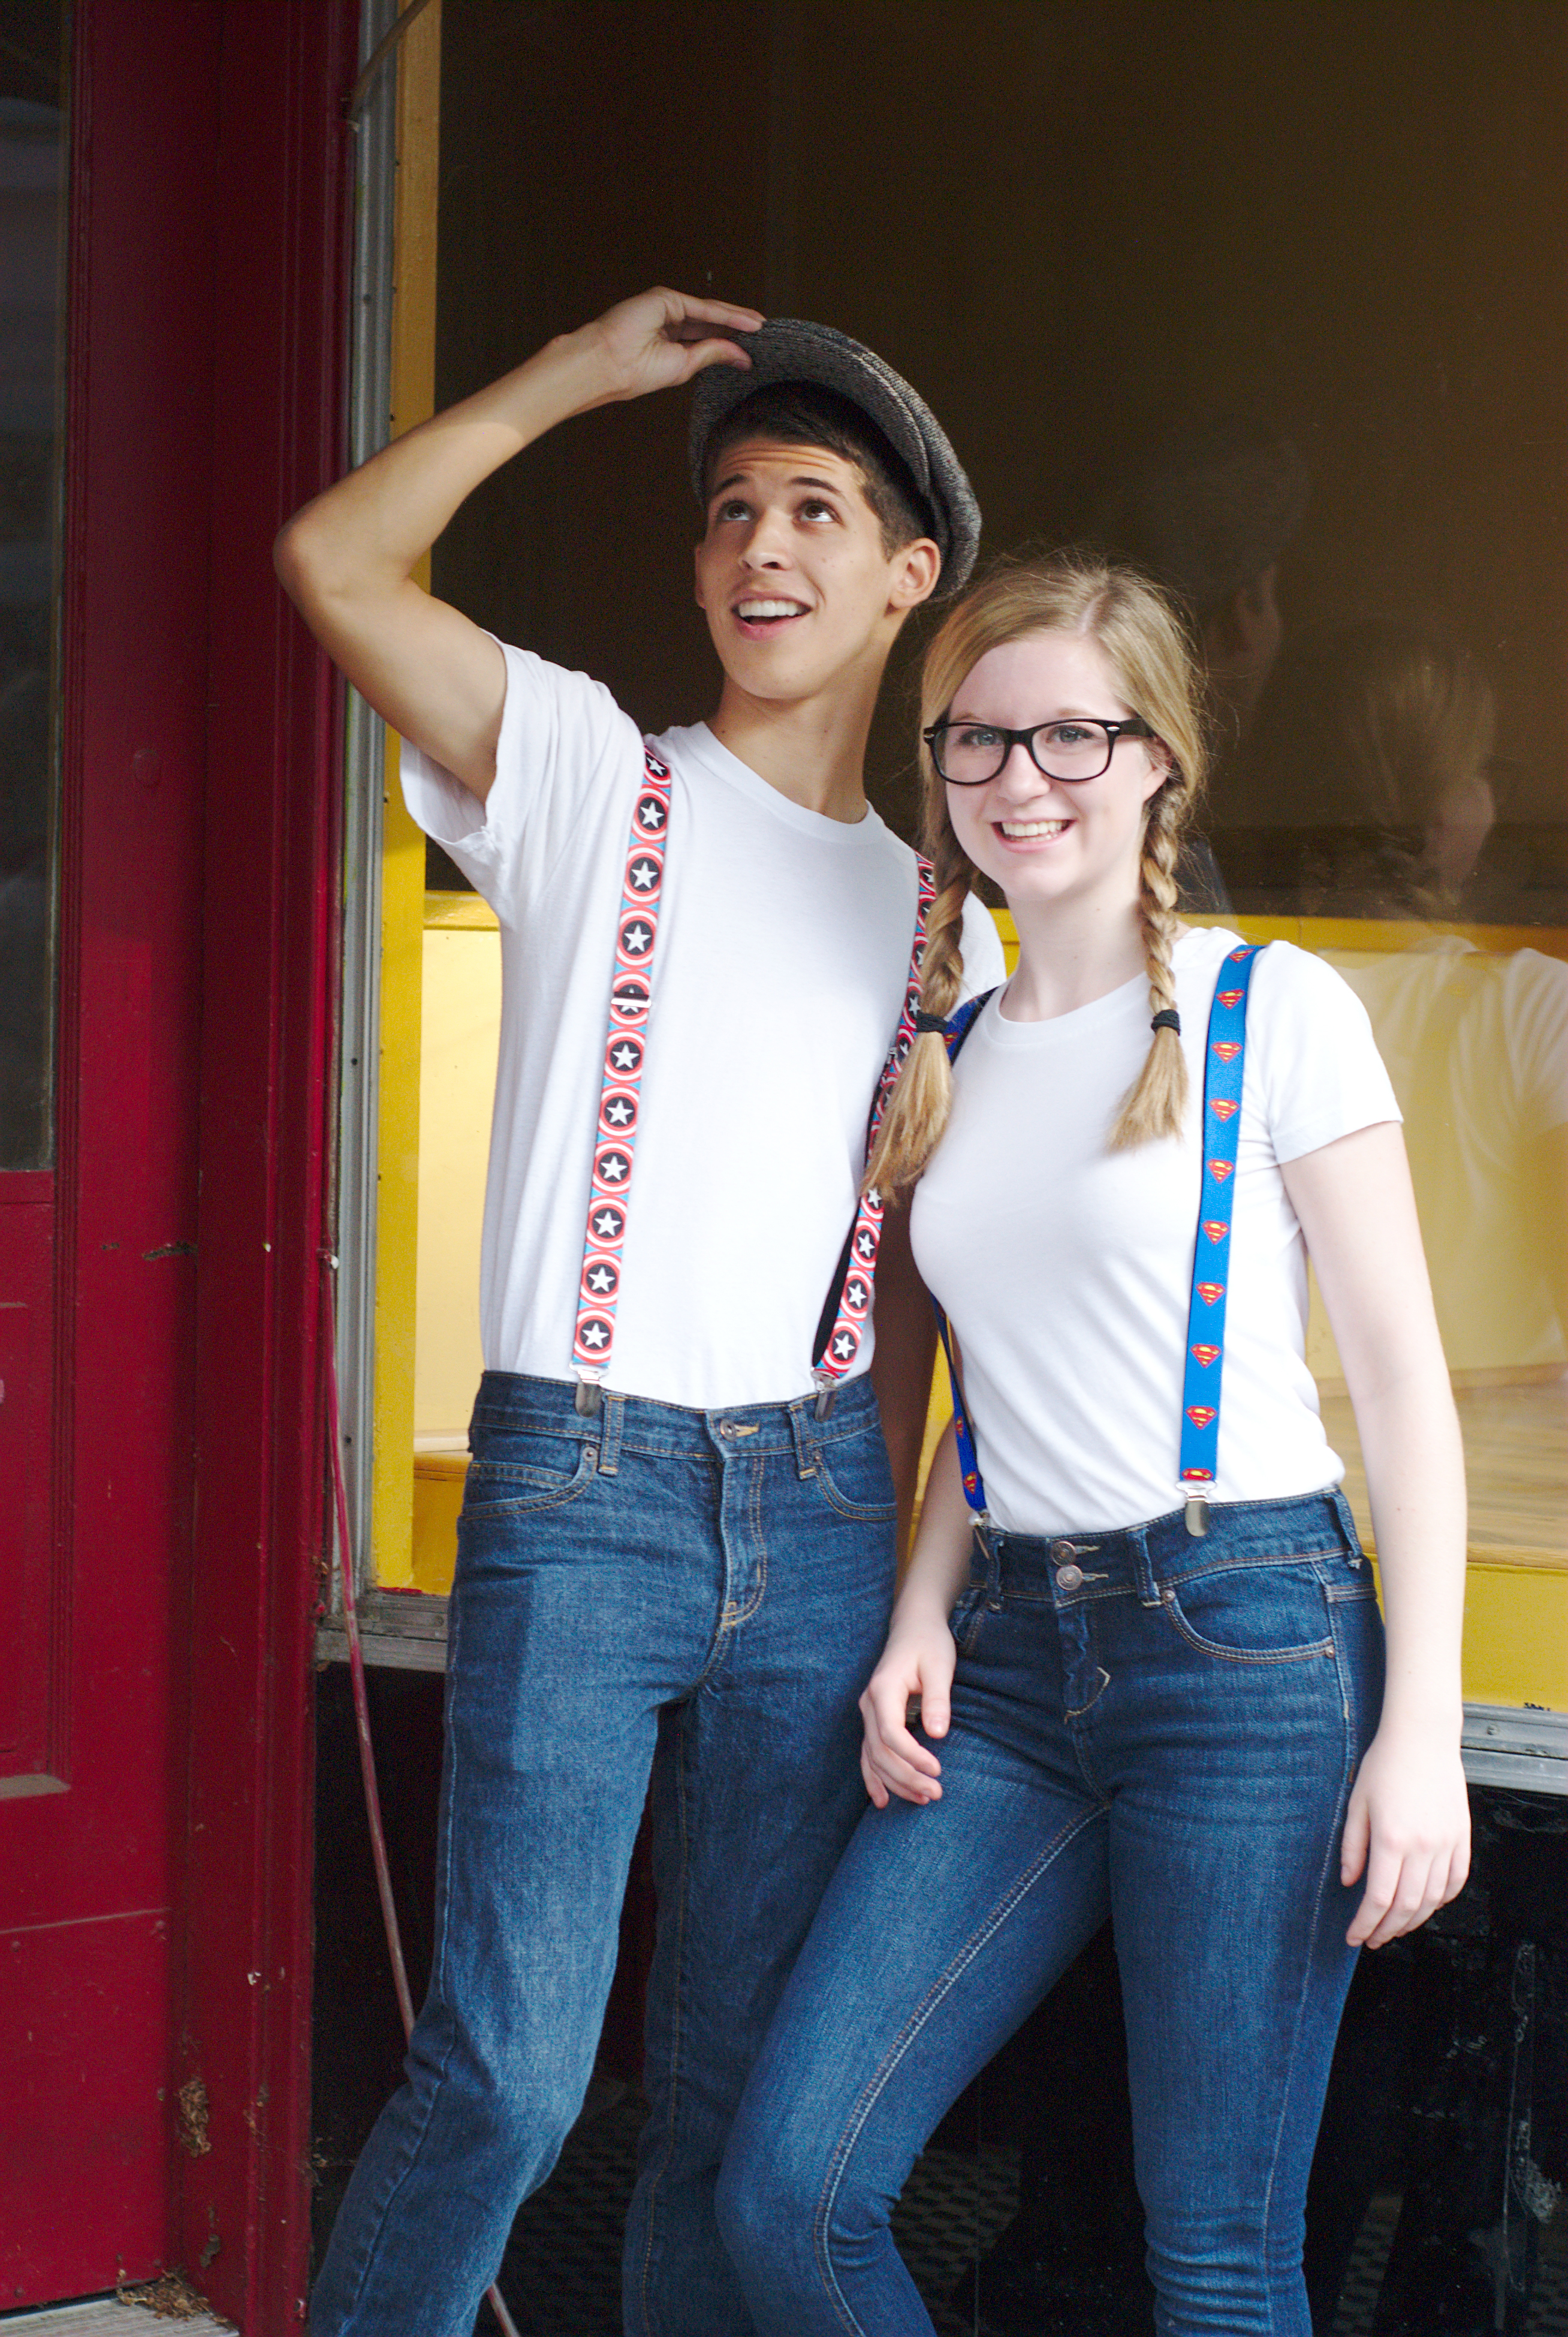 What Your Suspenders Say About You